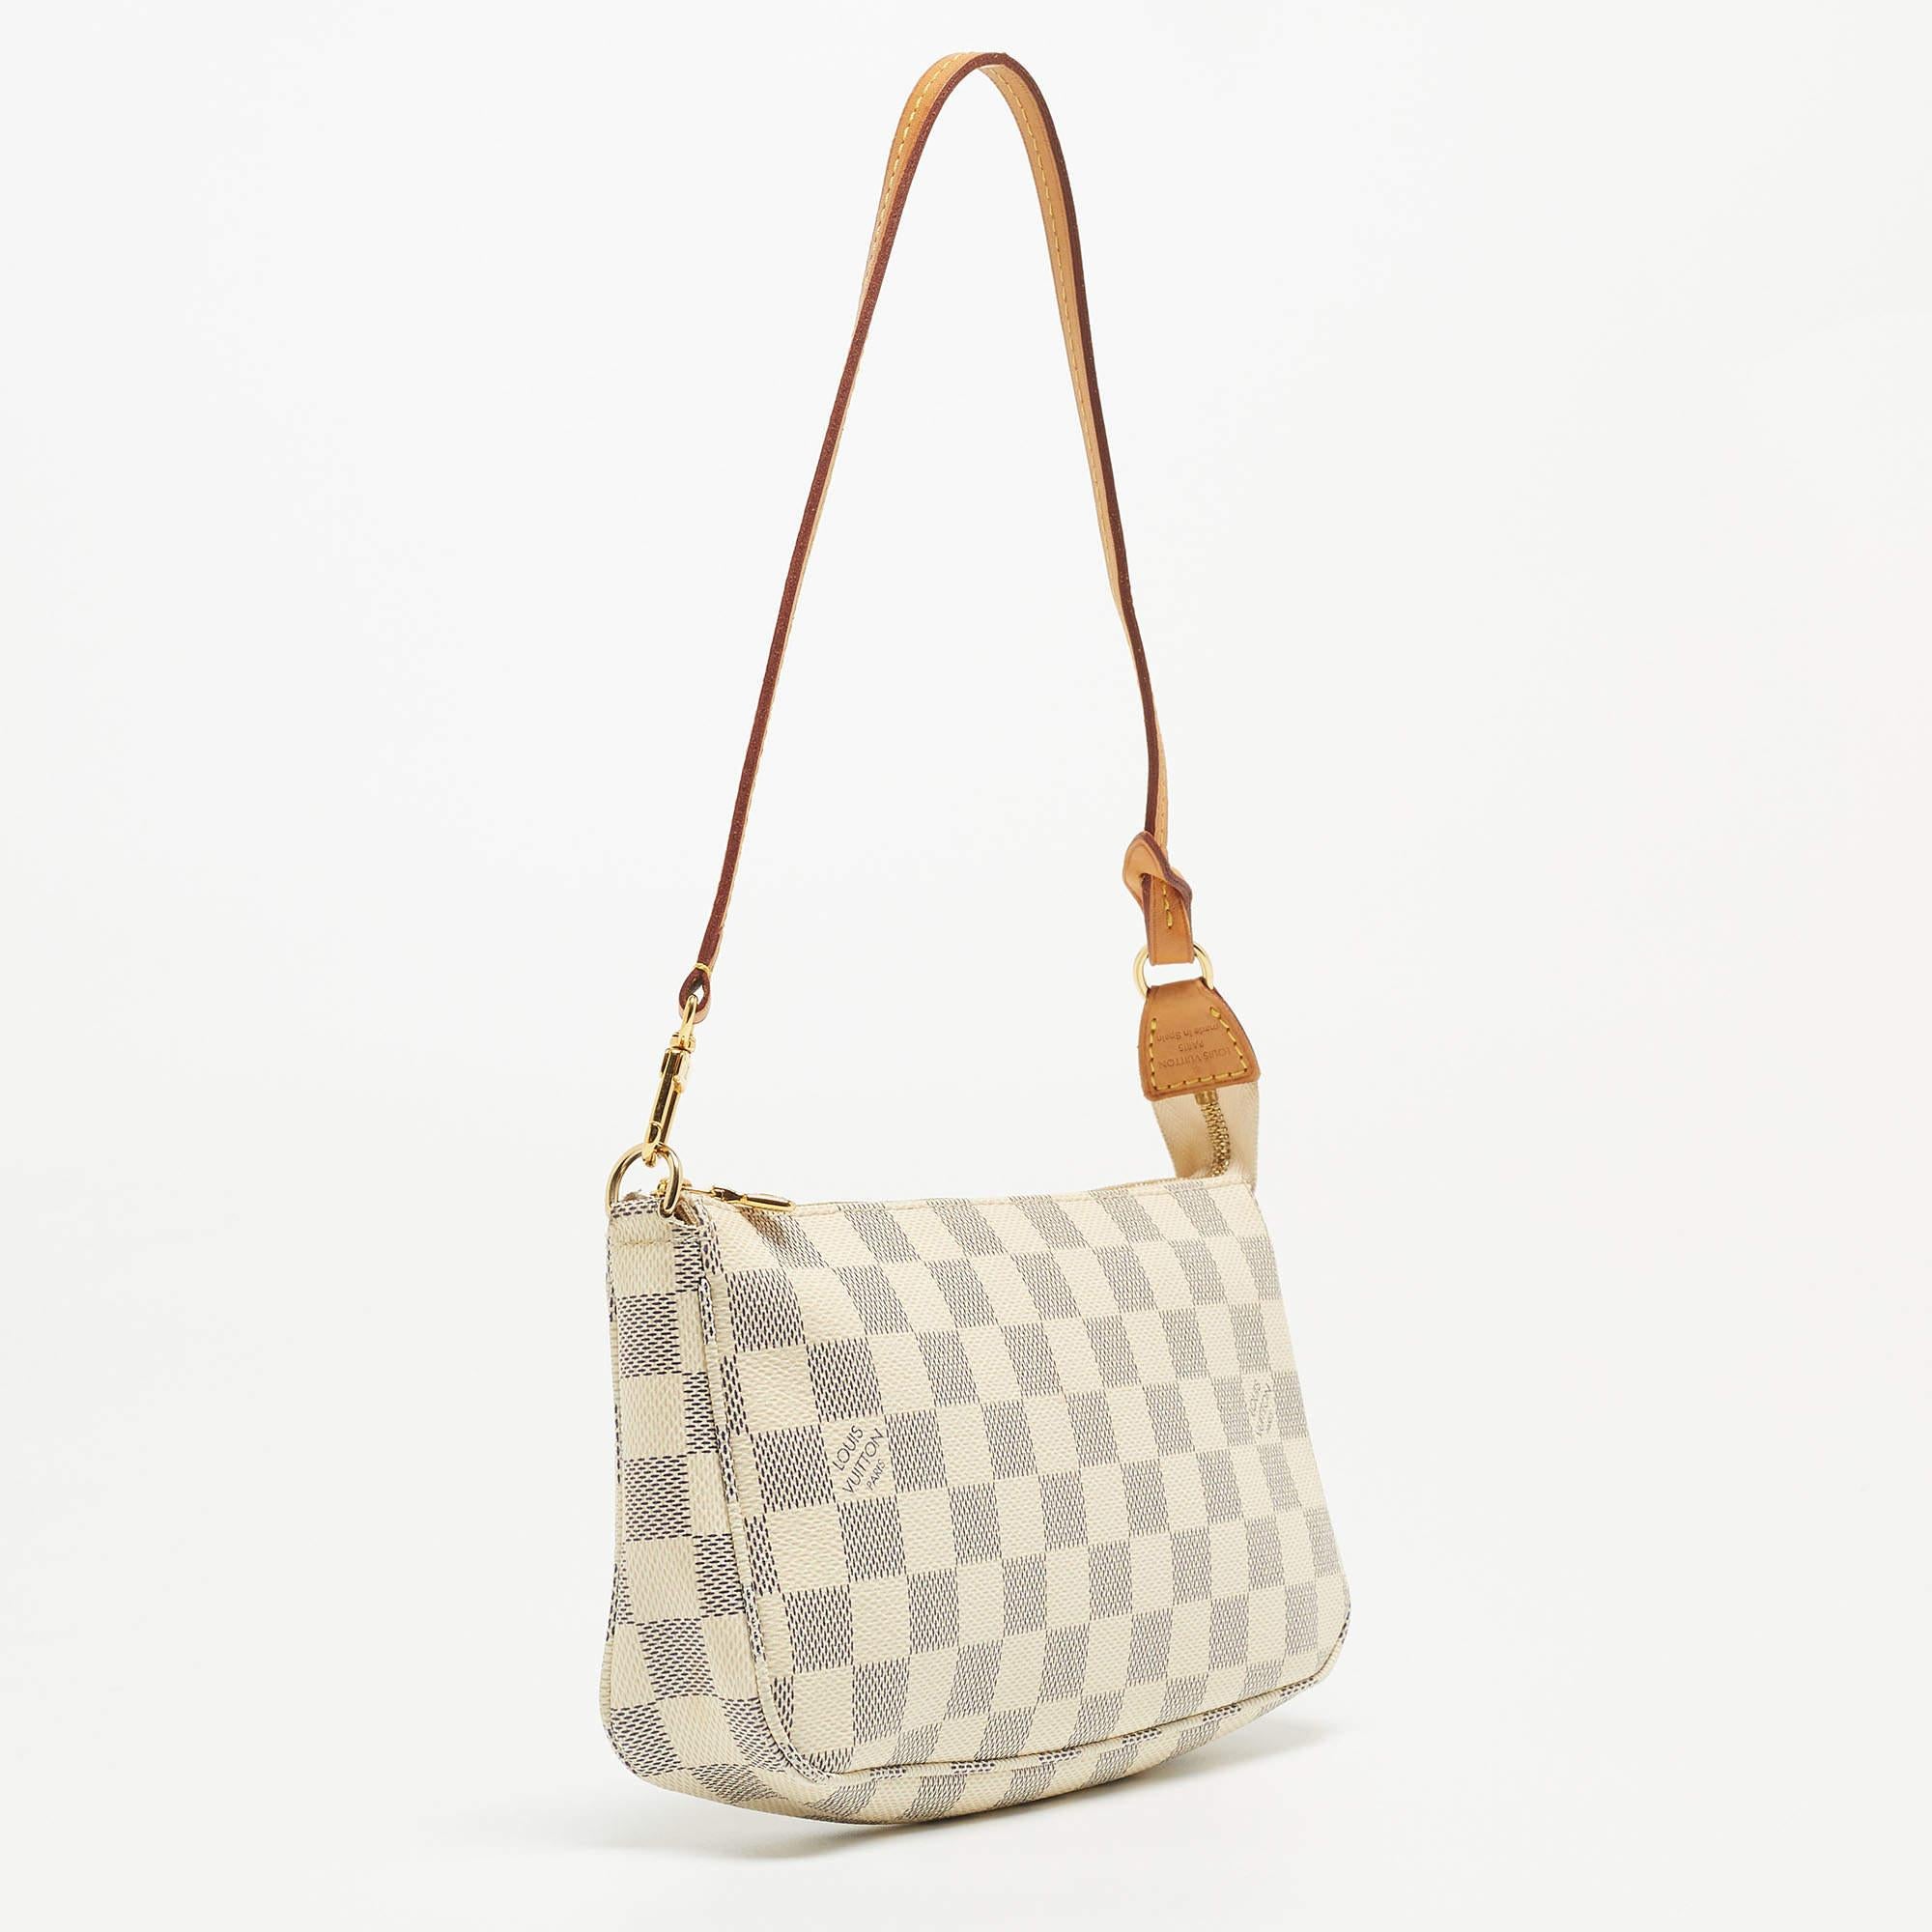 Trust this LV bag to be light, durable, and comfortable to carry. It is crafted beautifully using the best materials to be a durable style ally.

